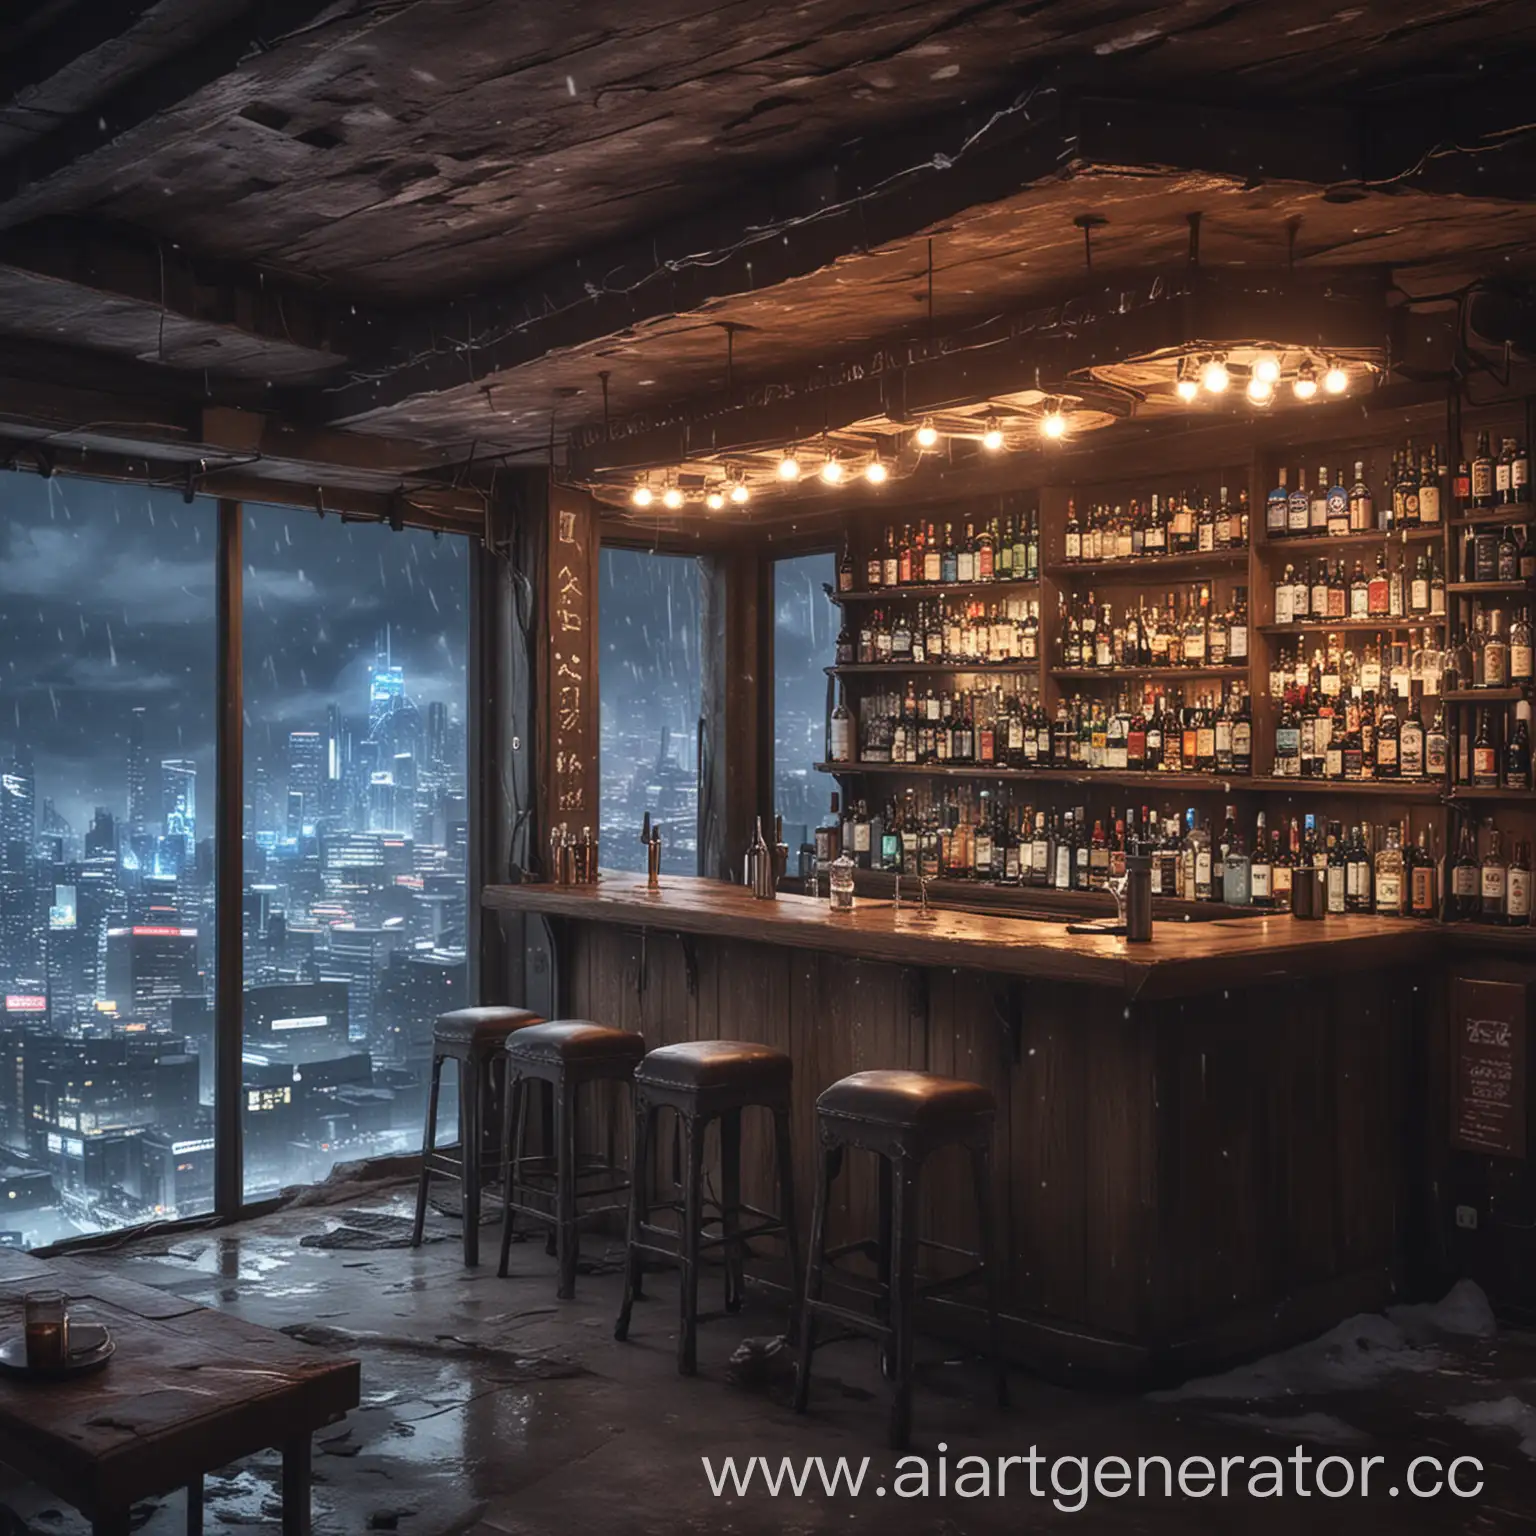 Anime-Bar-in-Winter-Atmosphere-on-16th-Floor-with-Music-and-Godzilla